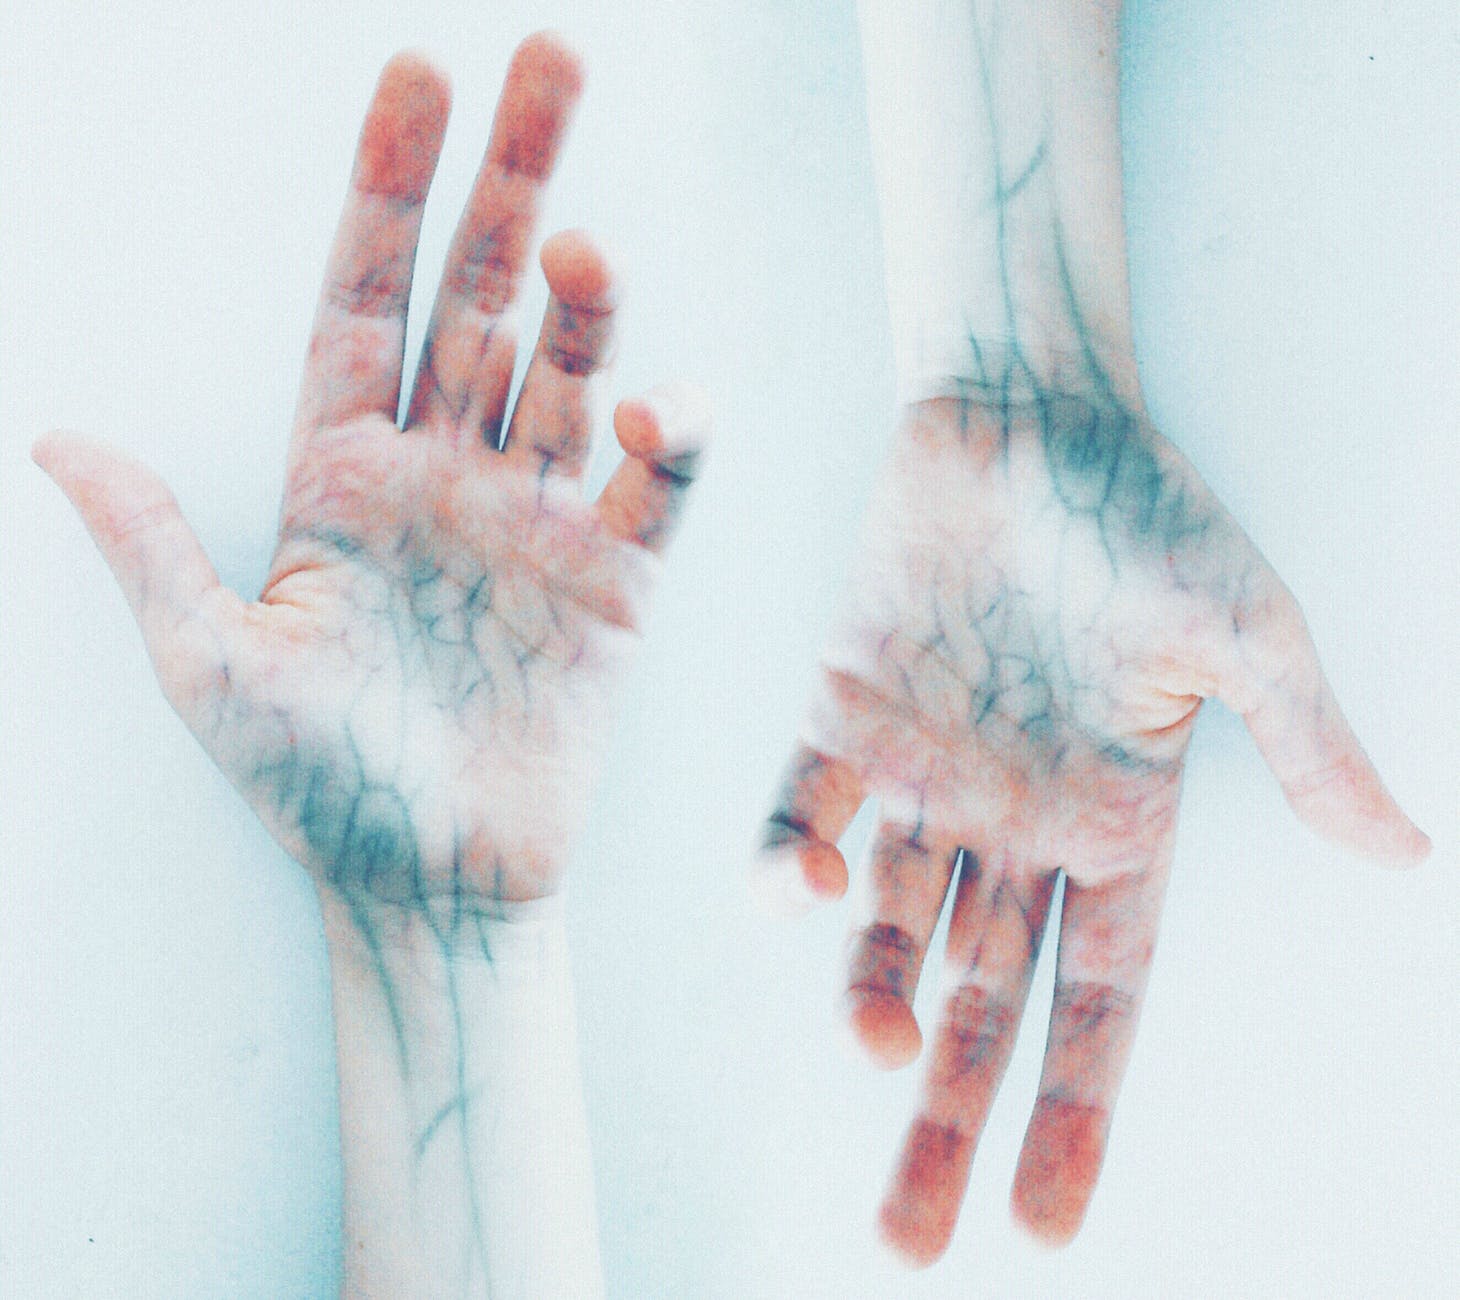 photo of hands with blue veins